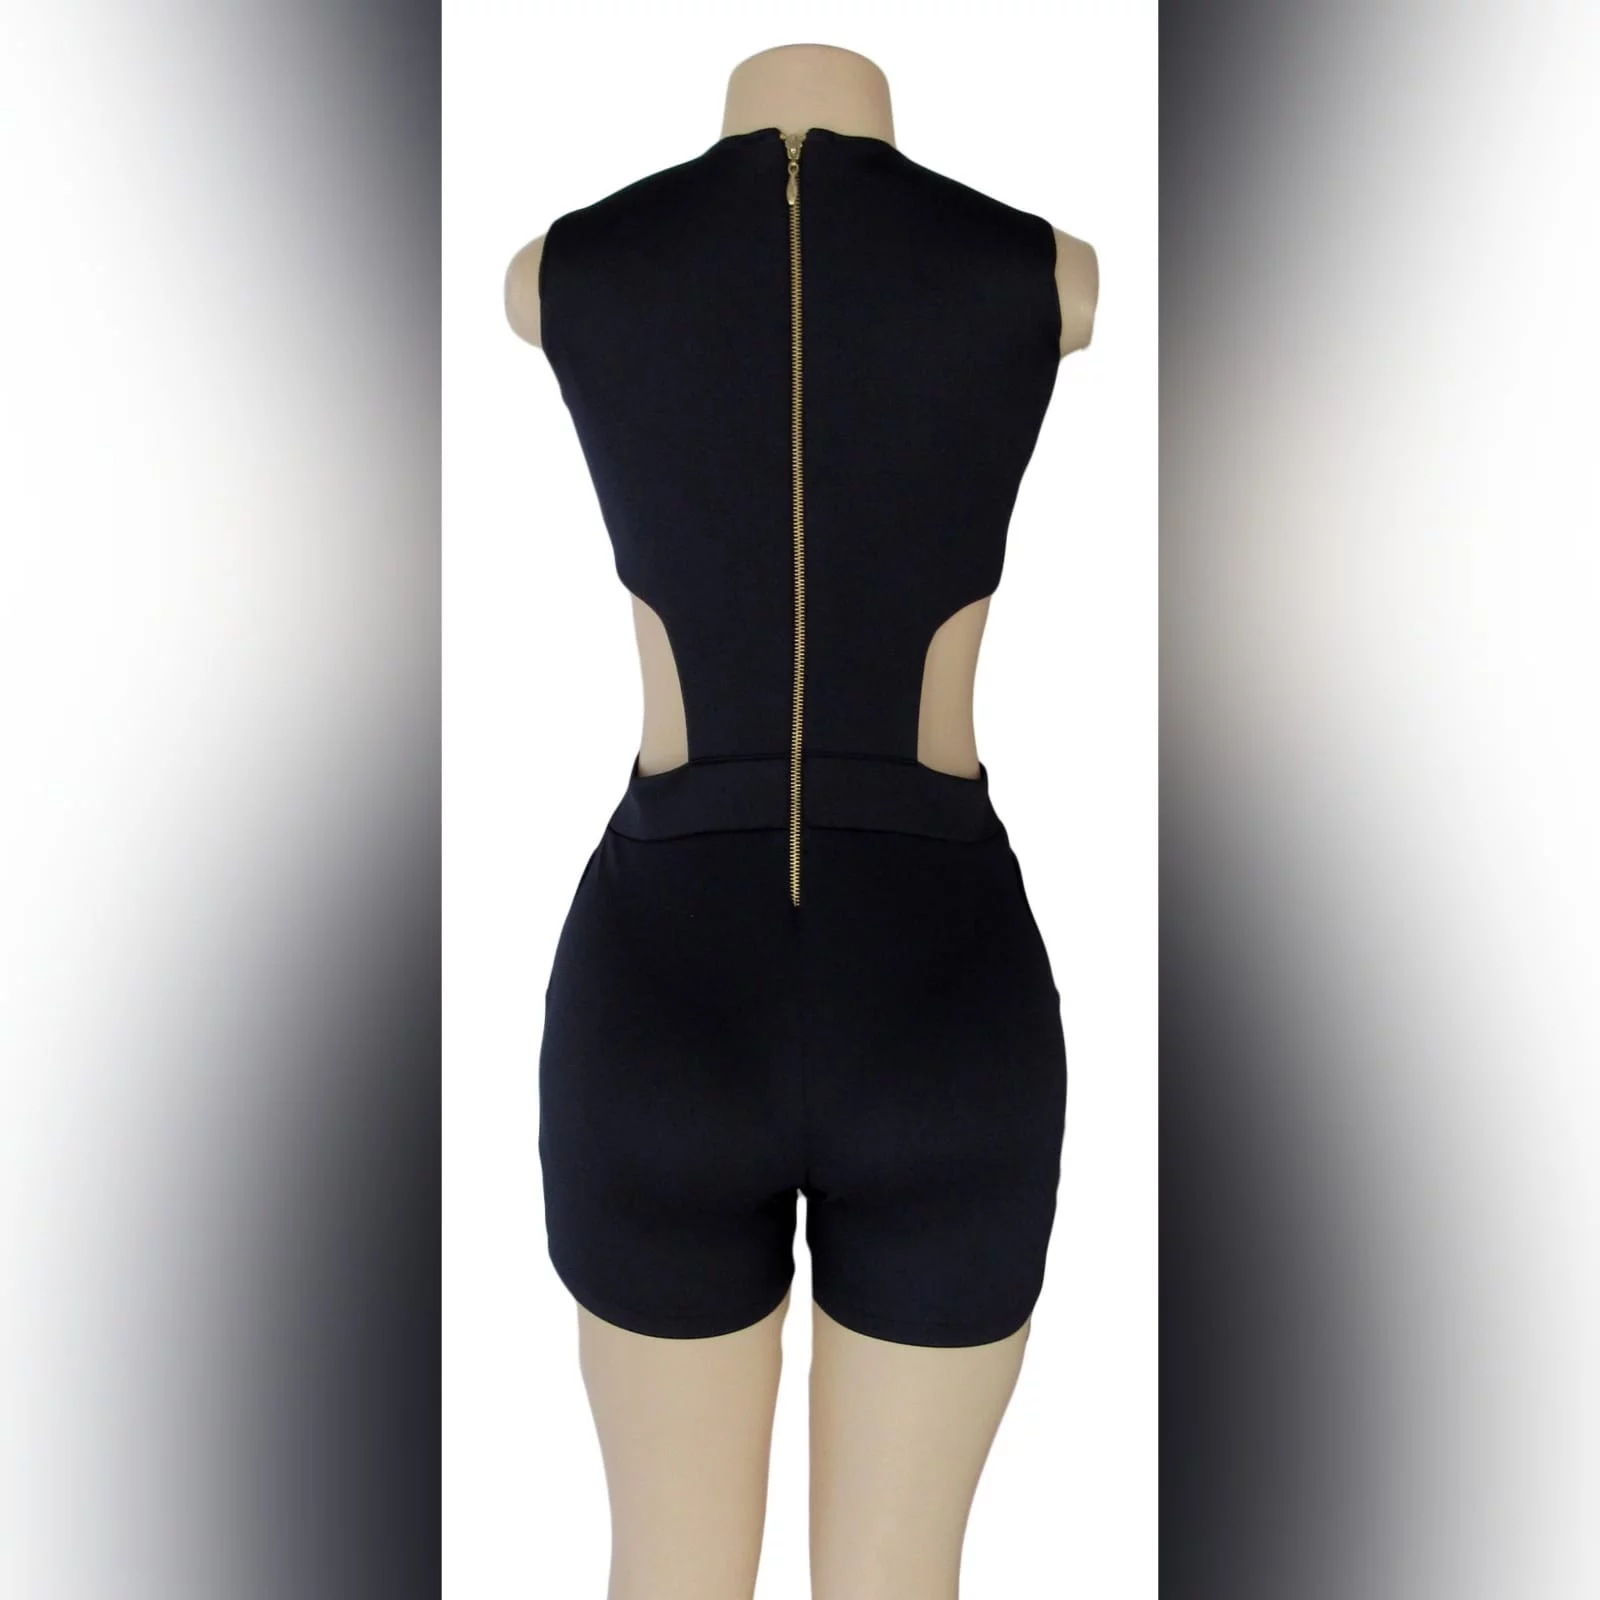 Navy blue smart casual bodysuit 3 navy blue smart casual bodysuit, with side tummy openings, v neckline detailed with lace-up detail, and back with a gold zipper.